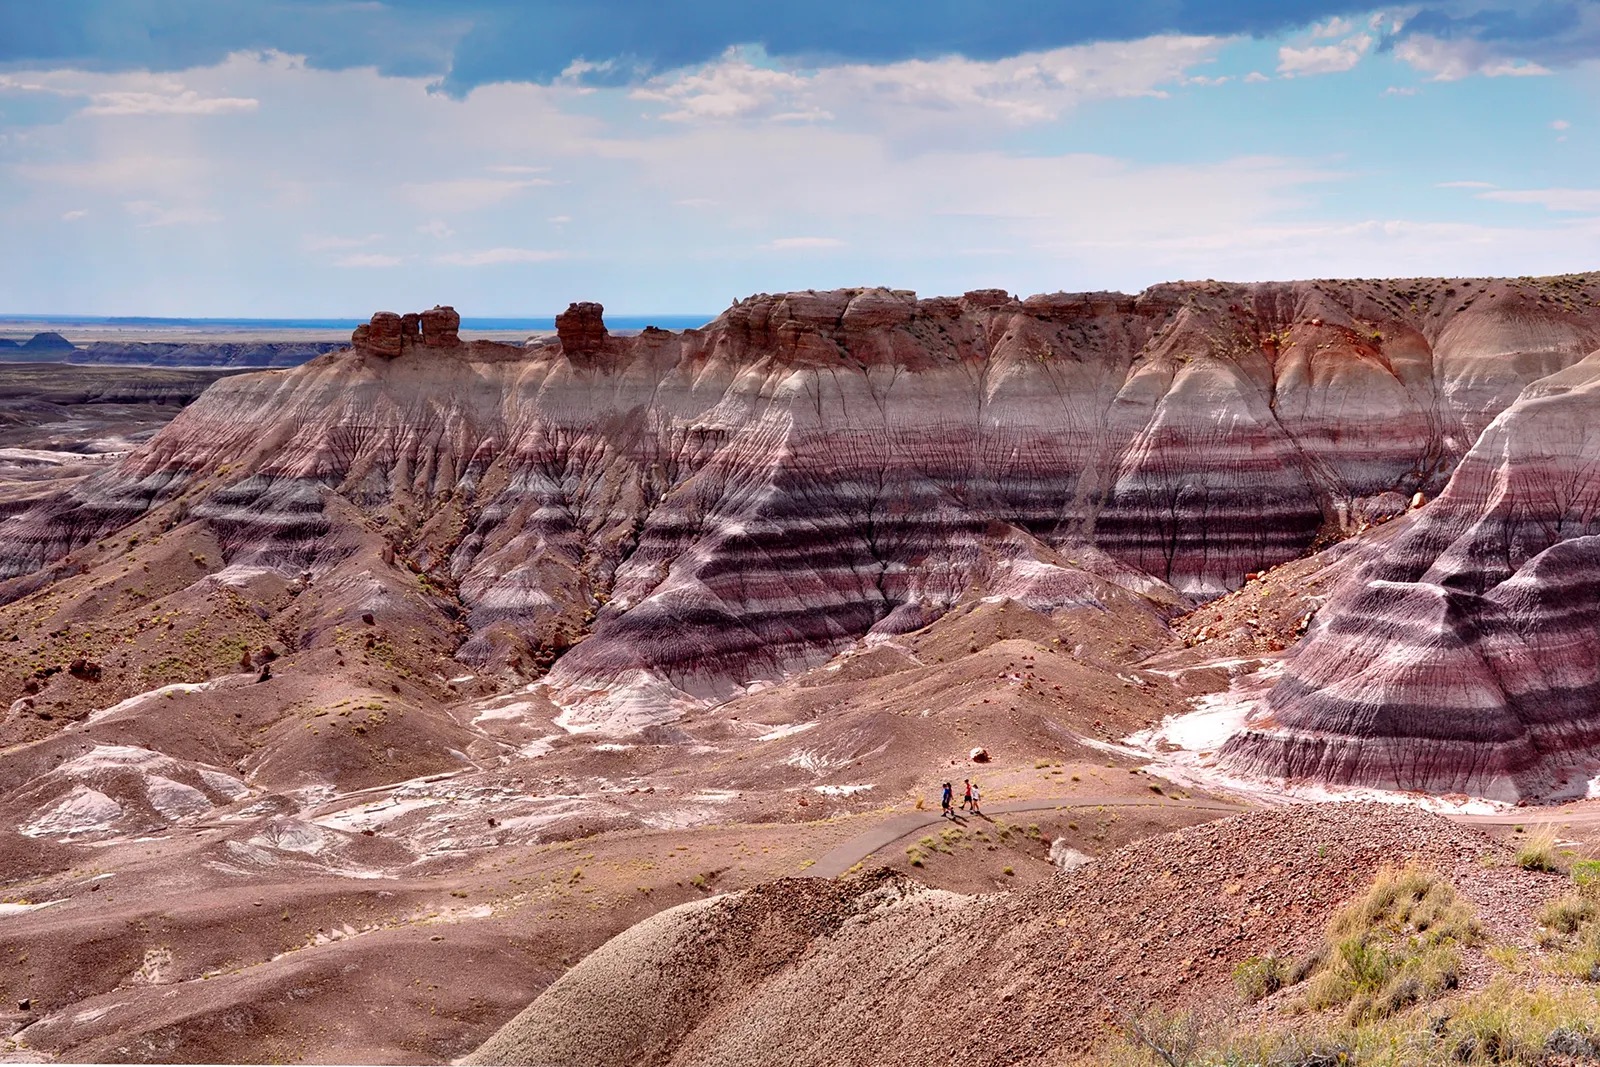 Are You a World Traveler? Test Your Knowledge by Matching These Majestic Natural Sites to Their Countries! Painted Desert, Arizona